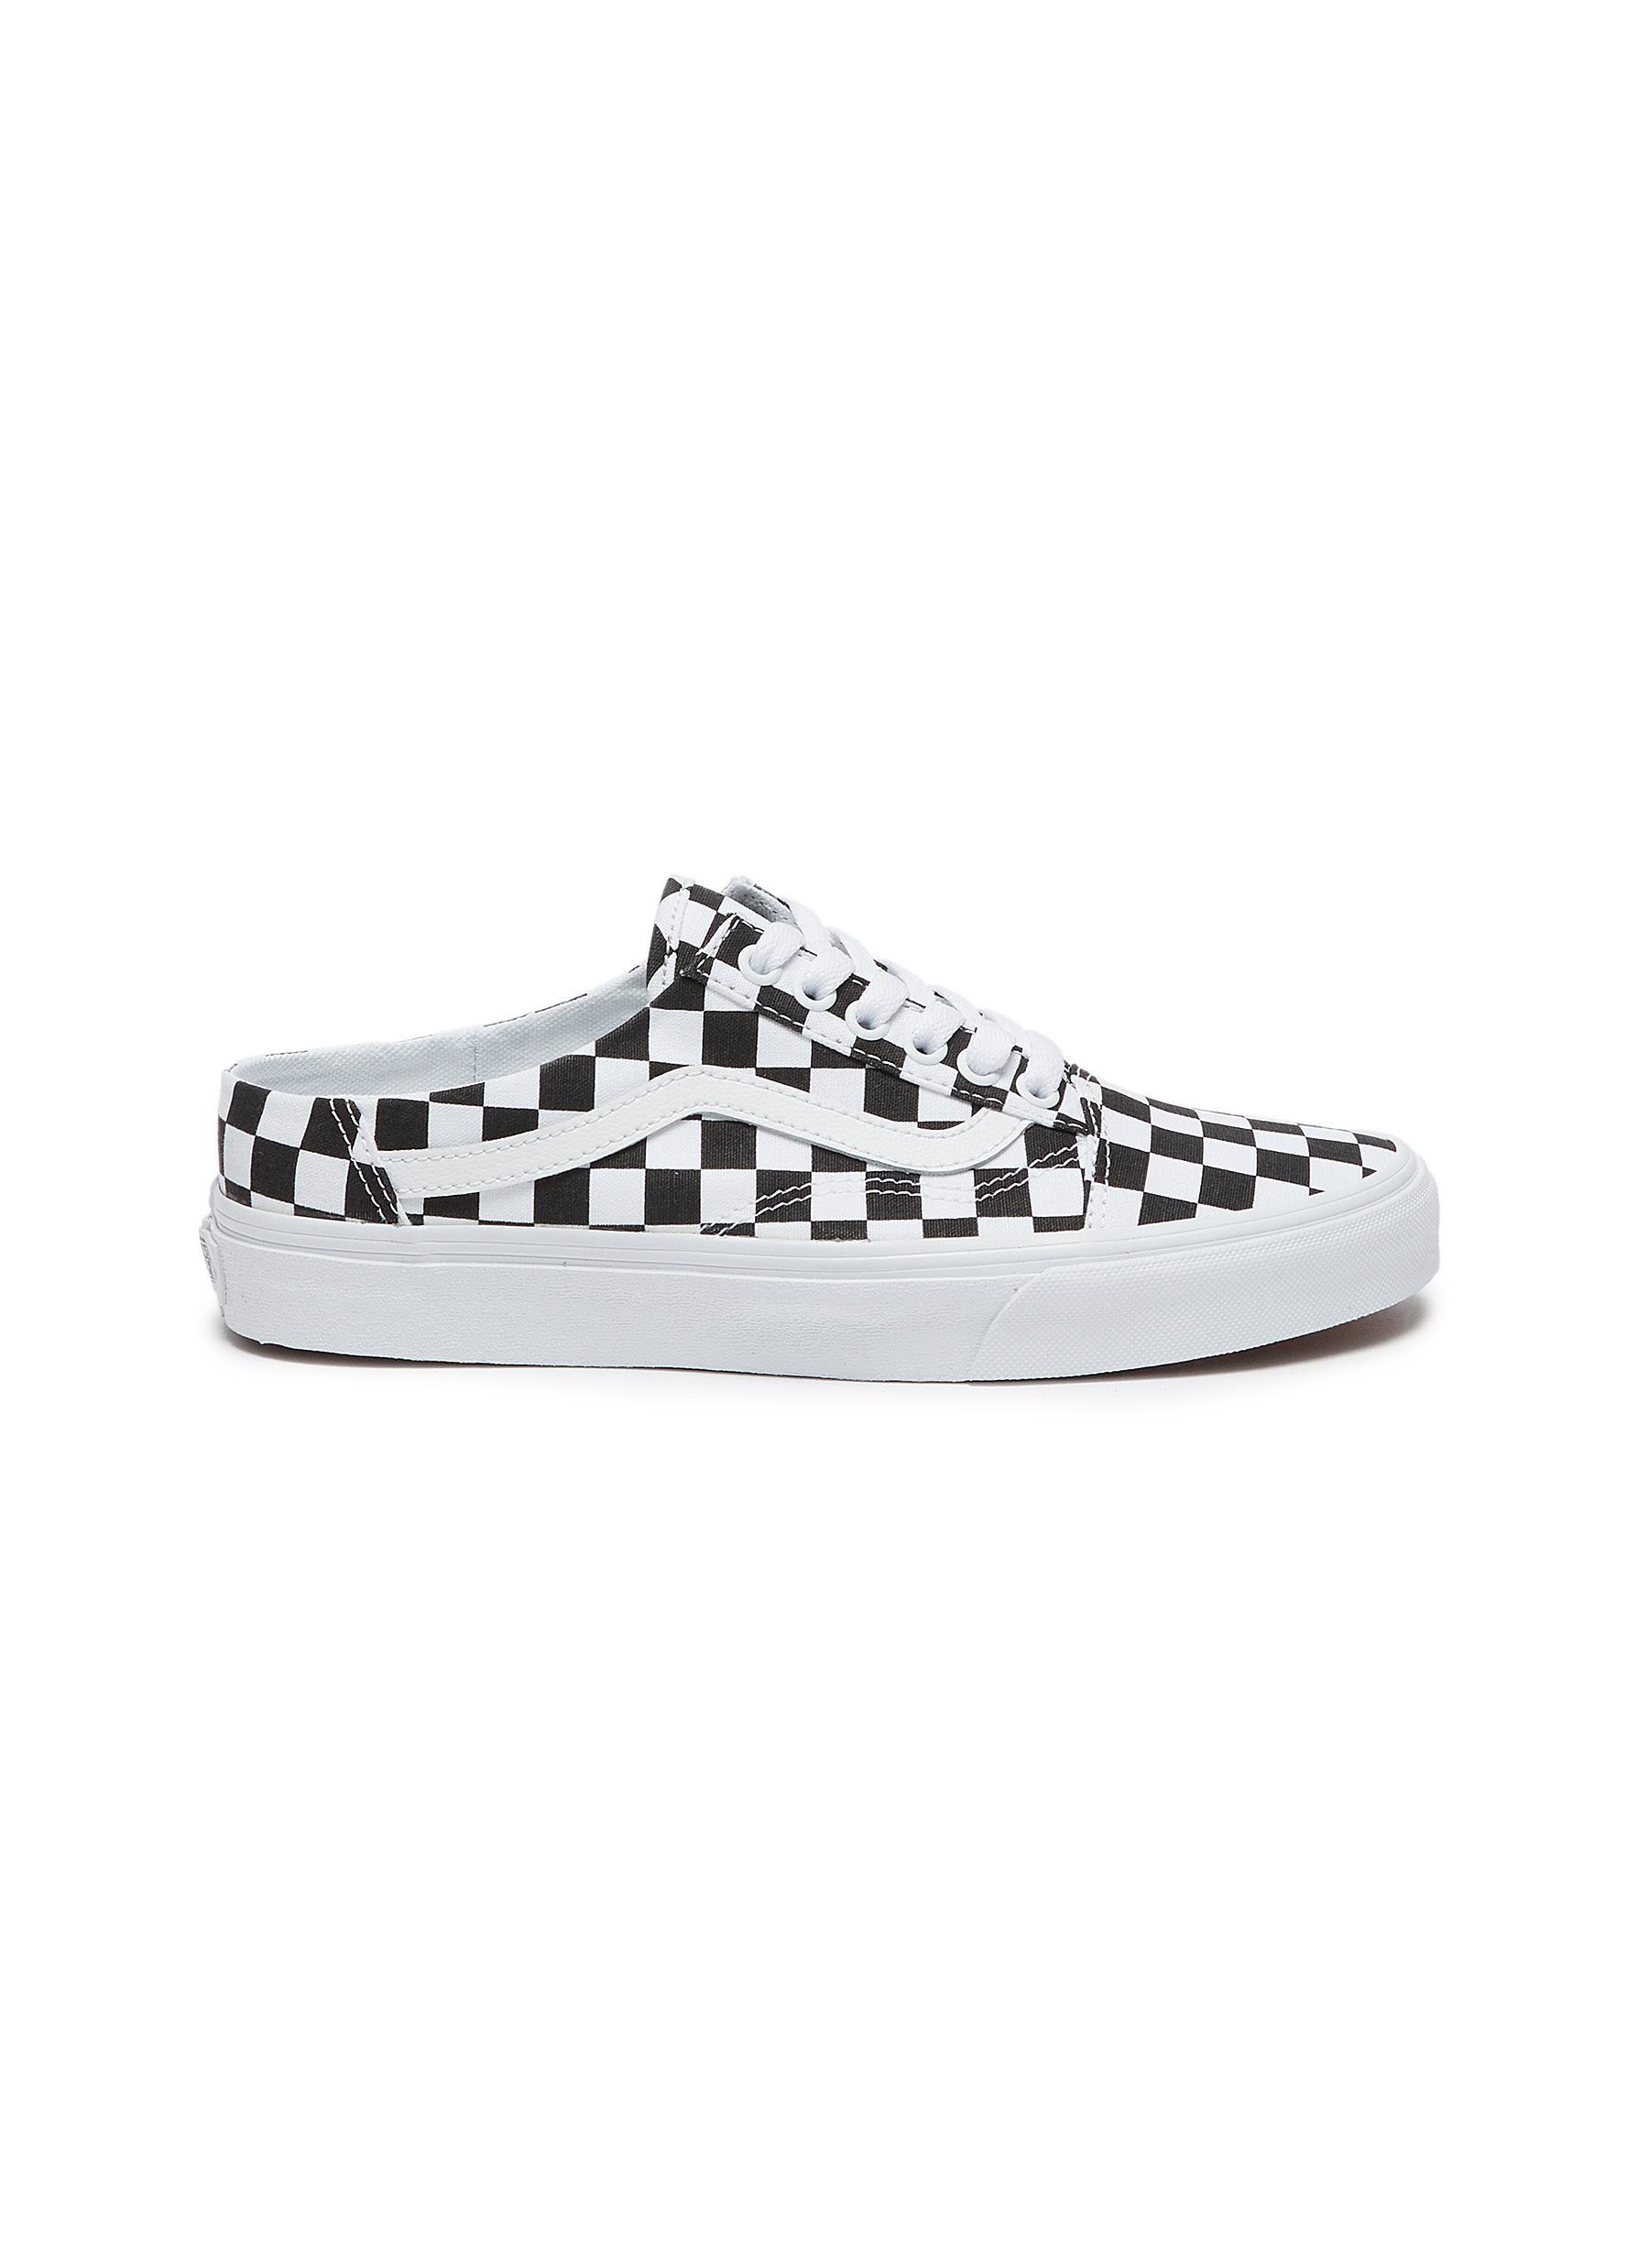 Vans Rubber Old Skool' Checkered Slip-on Mules Women Shoes Sneakers Low-top Old  Skool' Checkered Slip-on Mules in Black,White (White) | Lyst